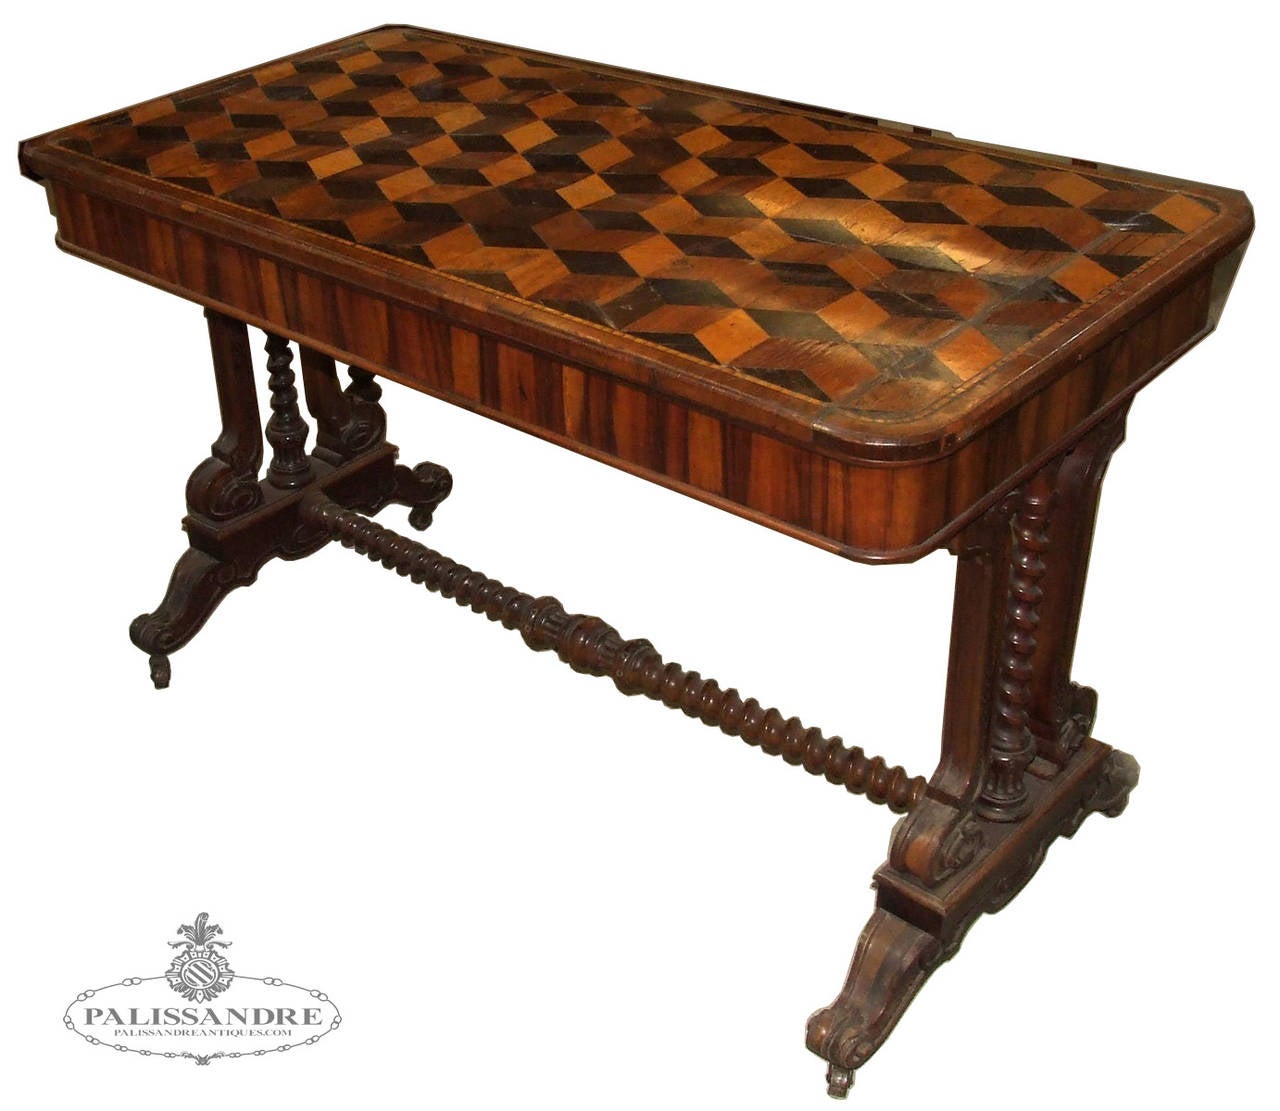 Wooden palissandre reception table with inlaid wood board decorated with geometric patterns. It rests on four turned legs joined two by two beam. Sheraton style.